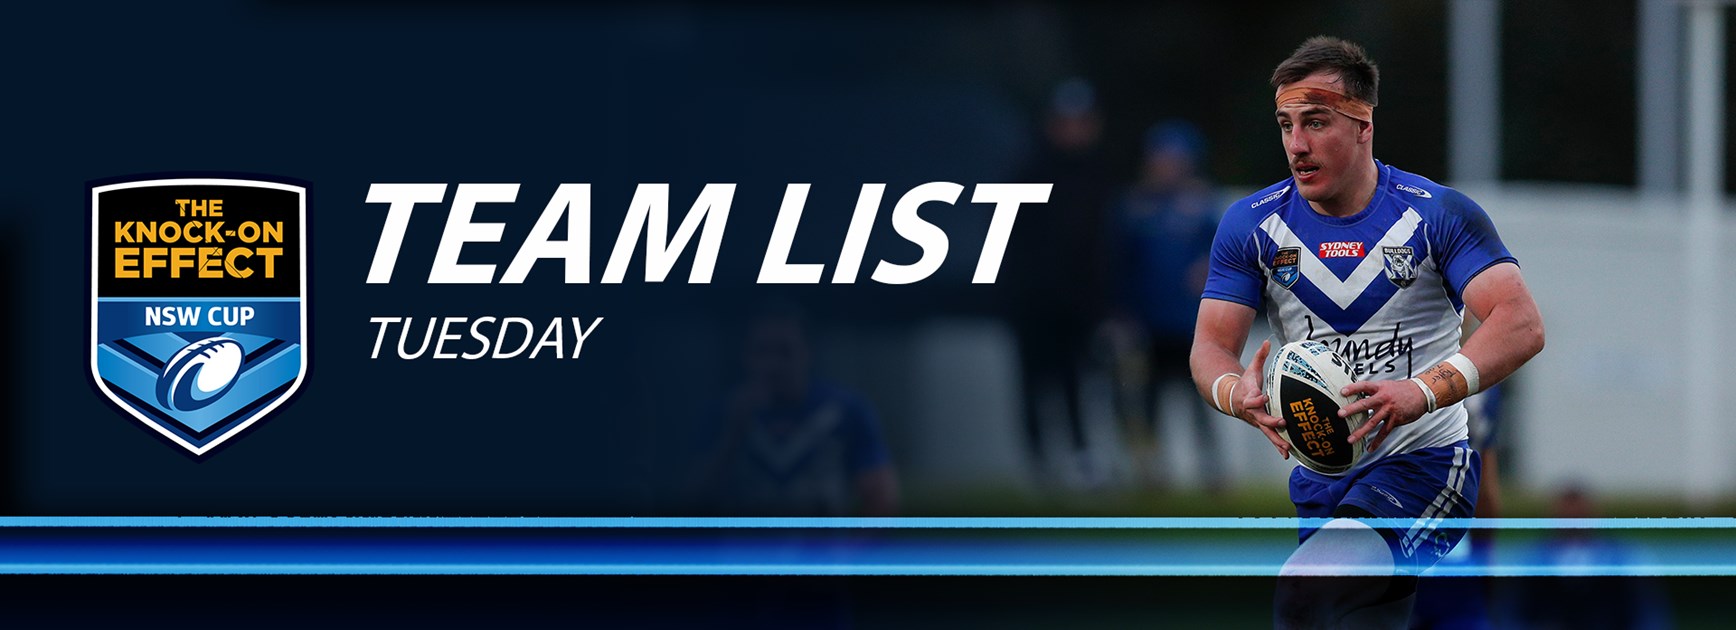 Team List Tuesday | The Knock-On Effect NSW Cup Finals Week Two